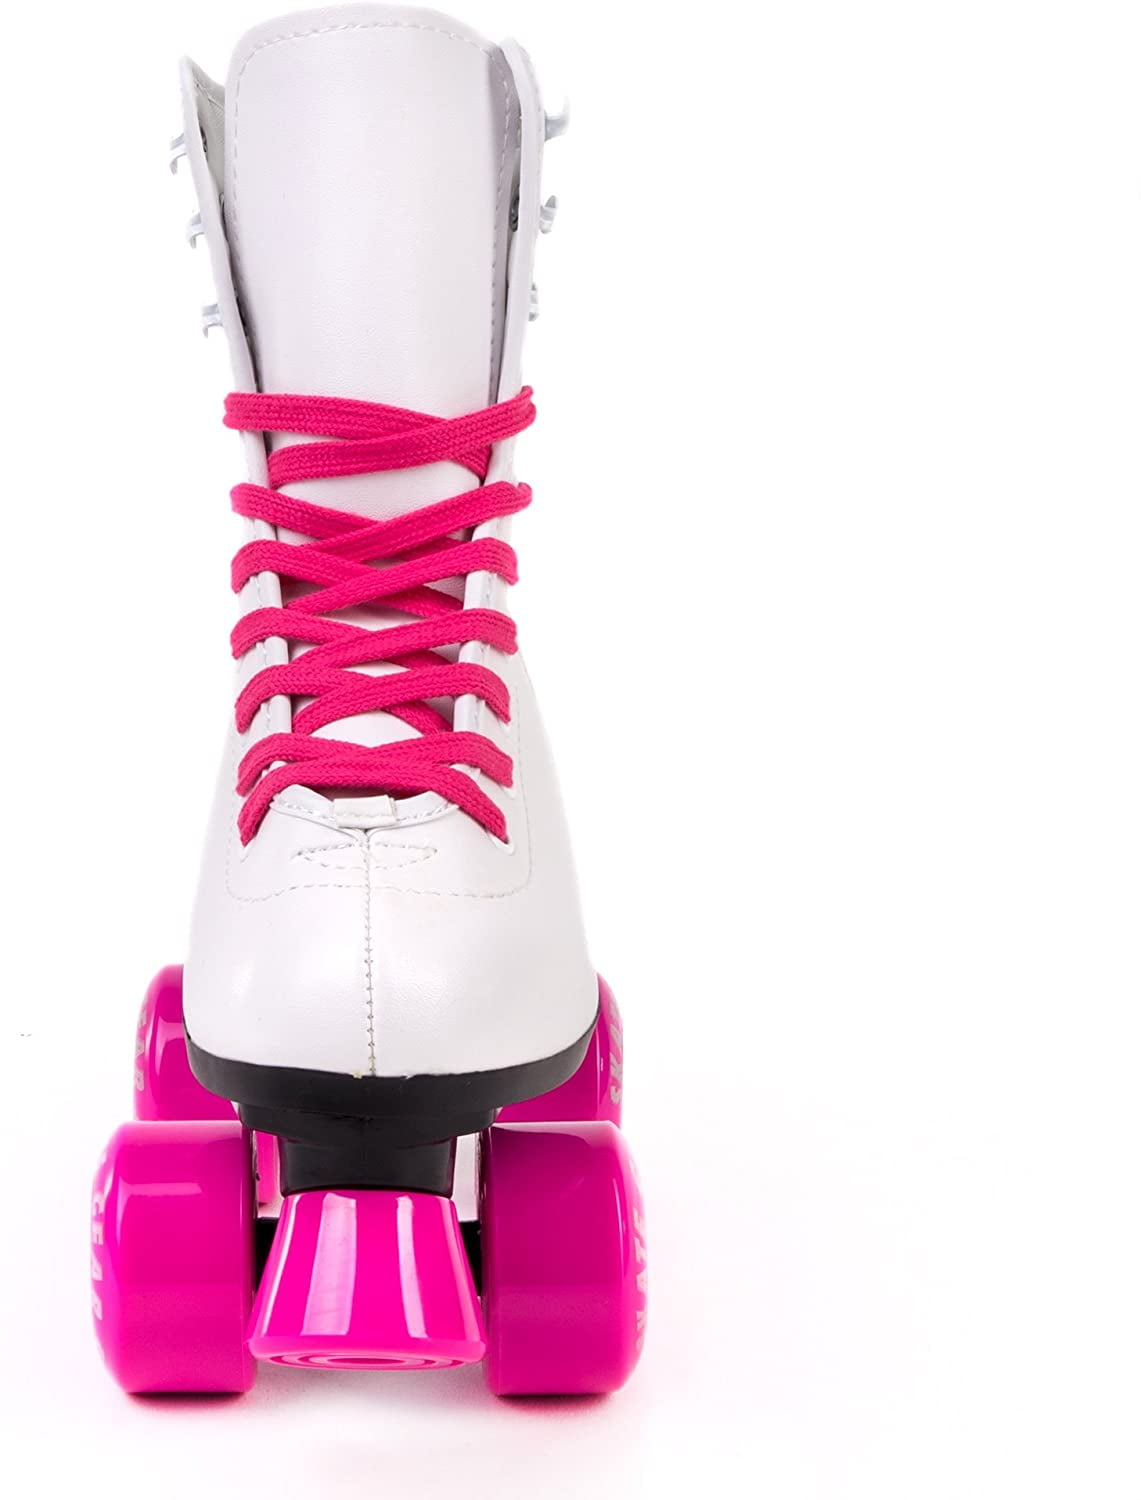 Skate Gear Soft Boot Roller Skate Retro Fashion High Top Design in Faux Leather for Indoor & Outdoor 